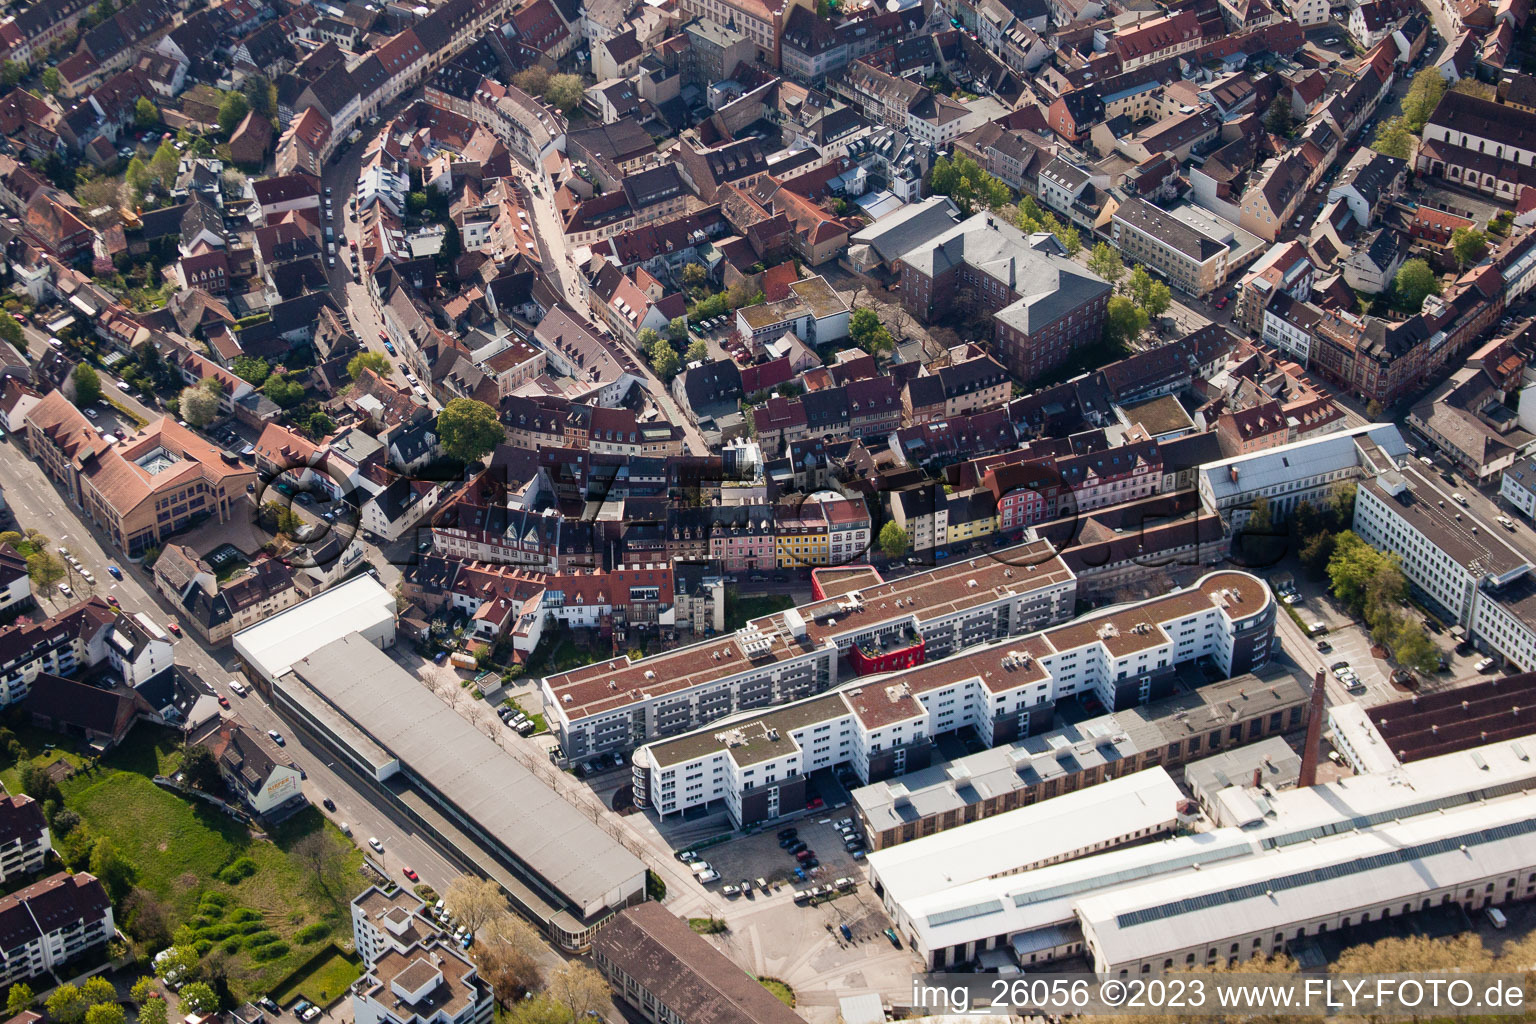 To the foundry in the district Durlach in Karlsruhe in the state Baden-Wuerttemberg, Germany from above